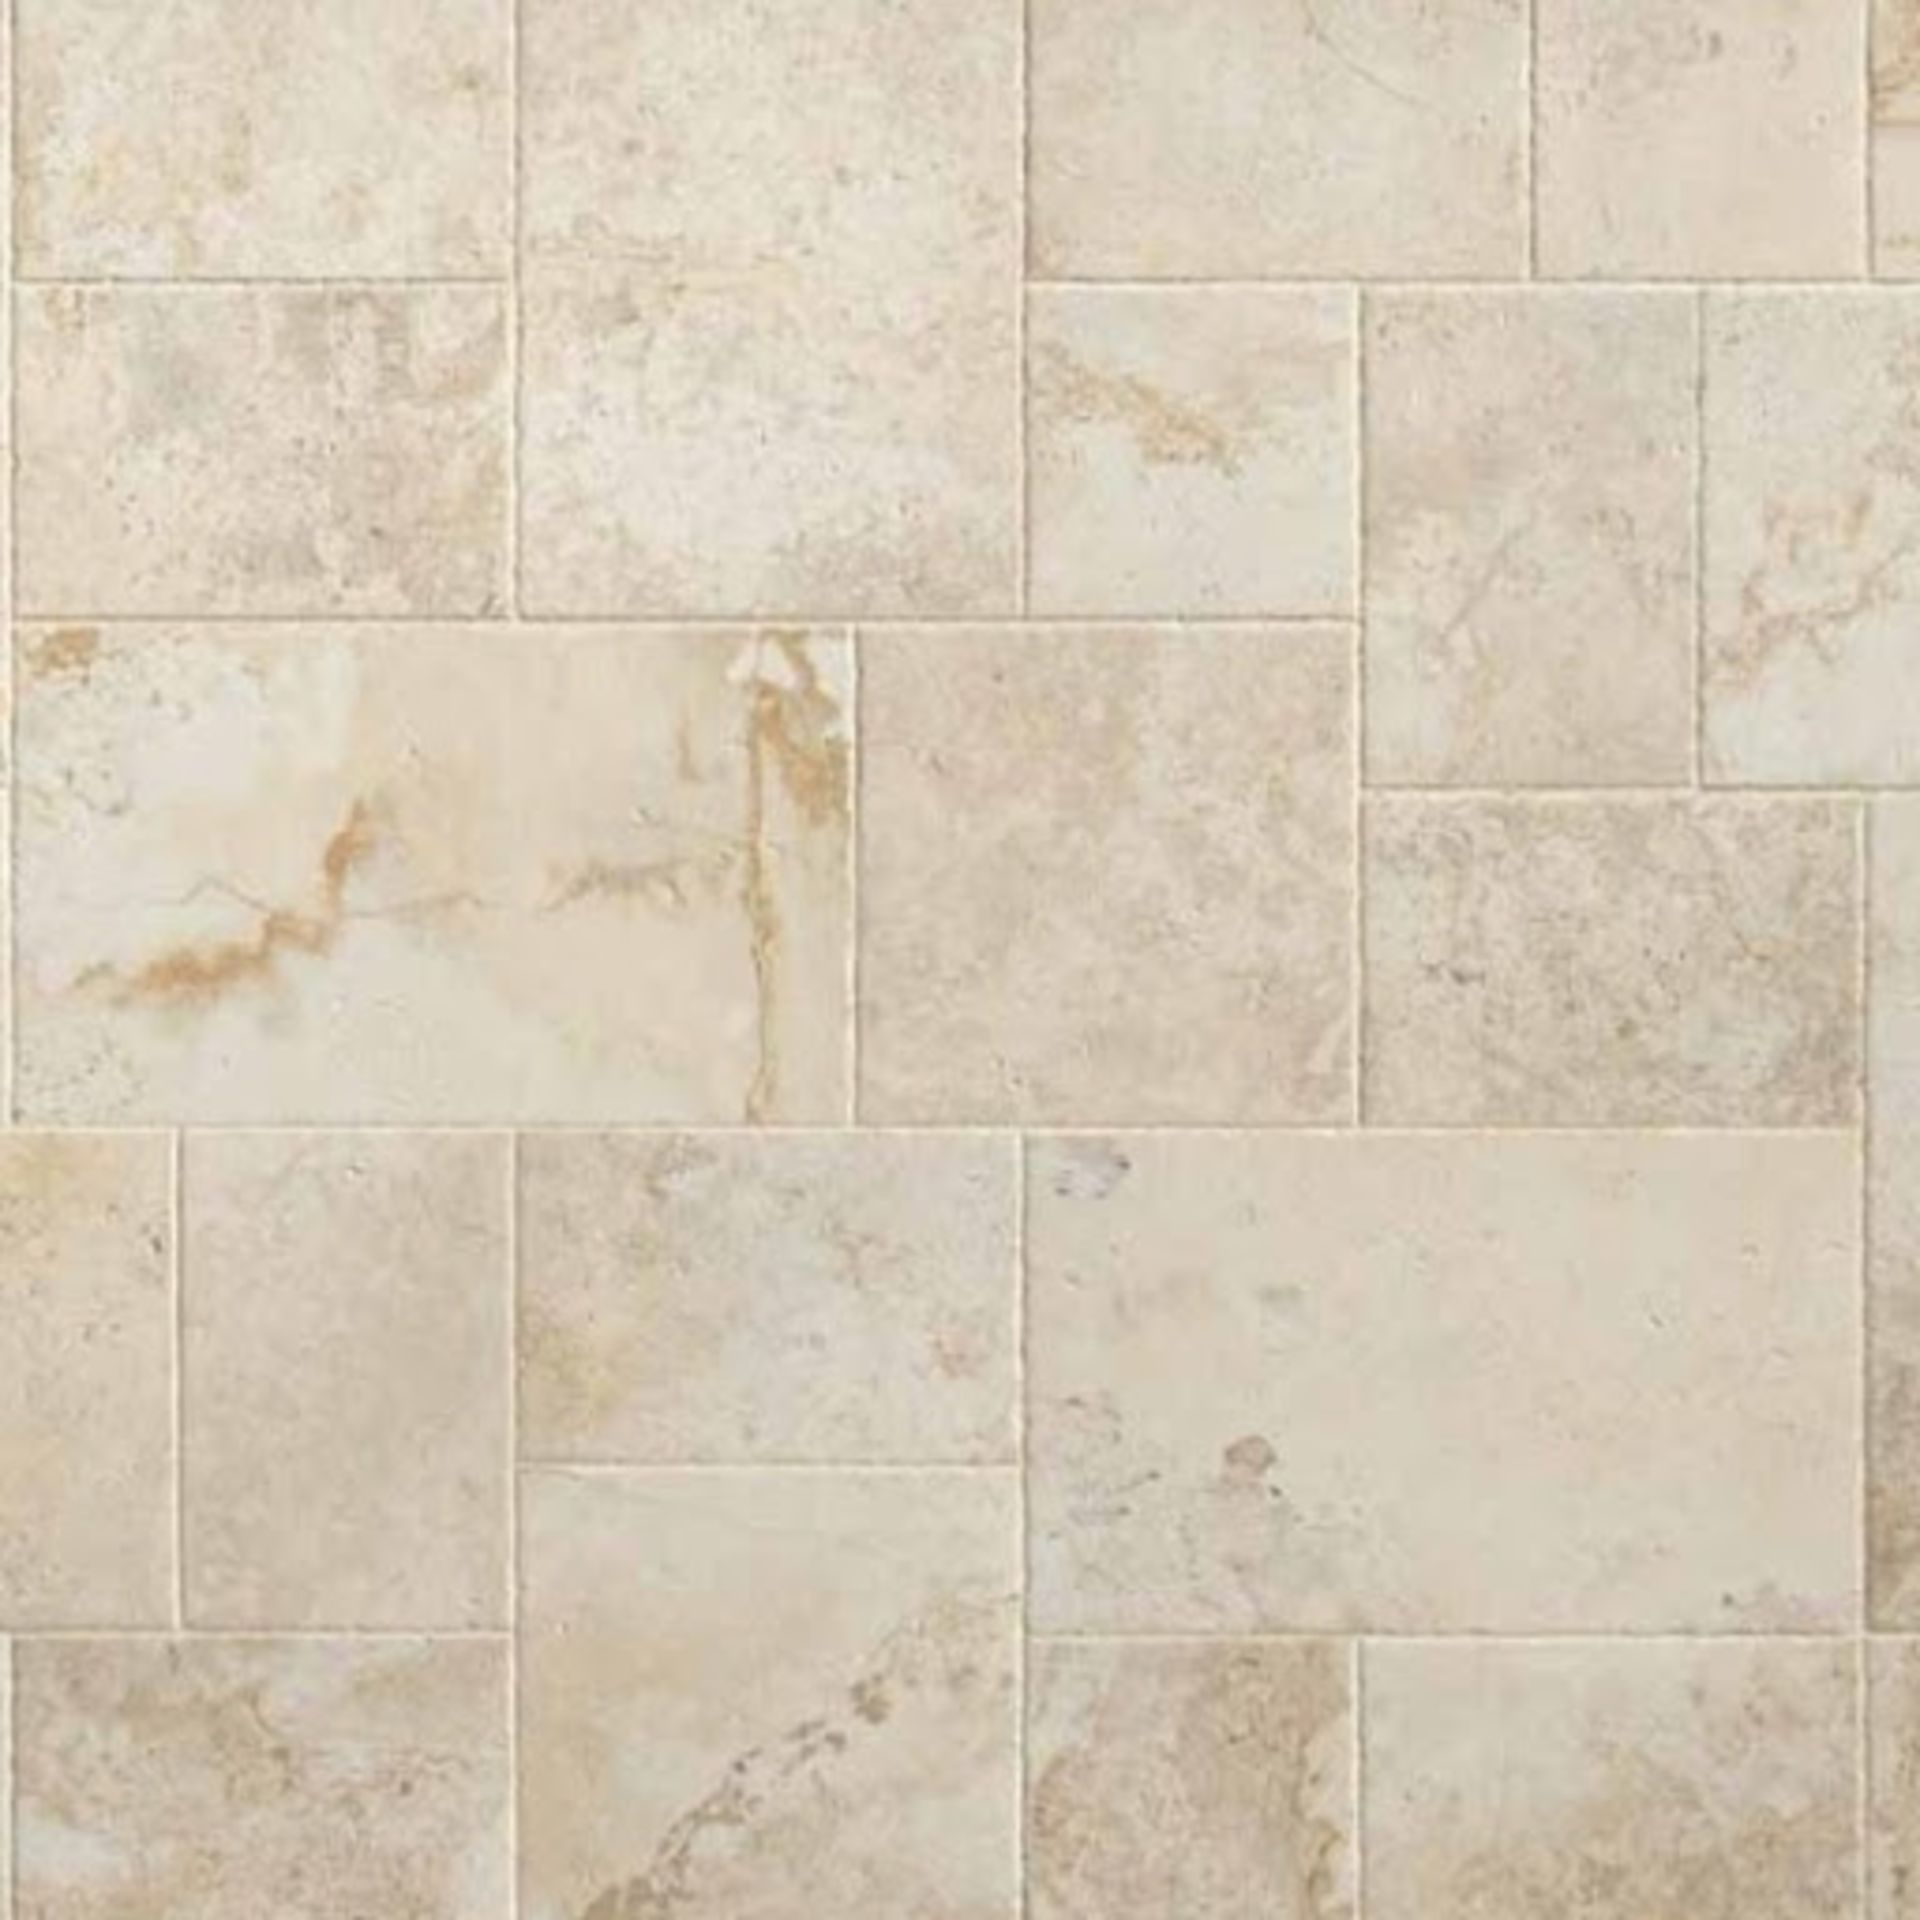 NEW 8.76m2 Imola Beige Wall and Floor Tiles. 605x605mm per tile, 10mm thick. This tile has a ... - Bild 2 aus 3